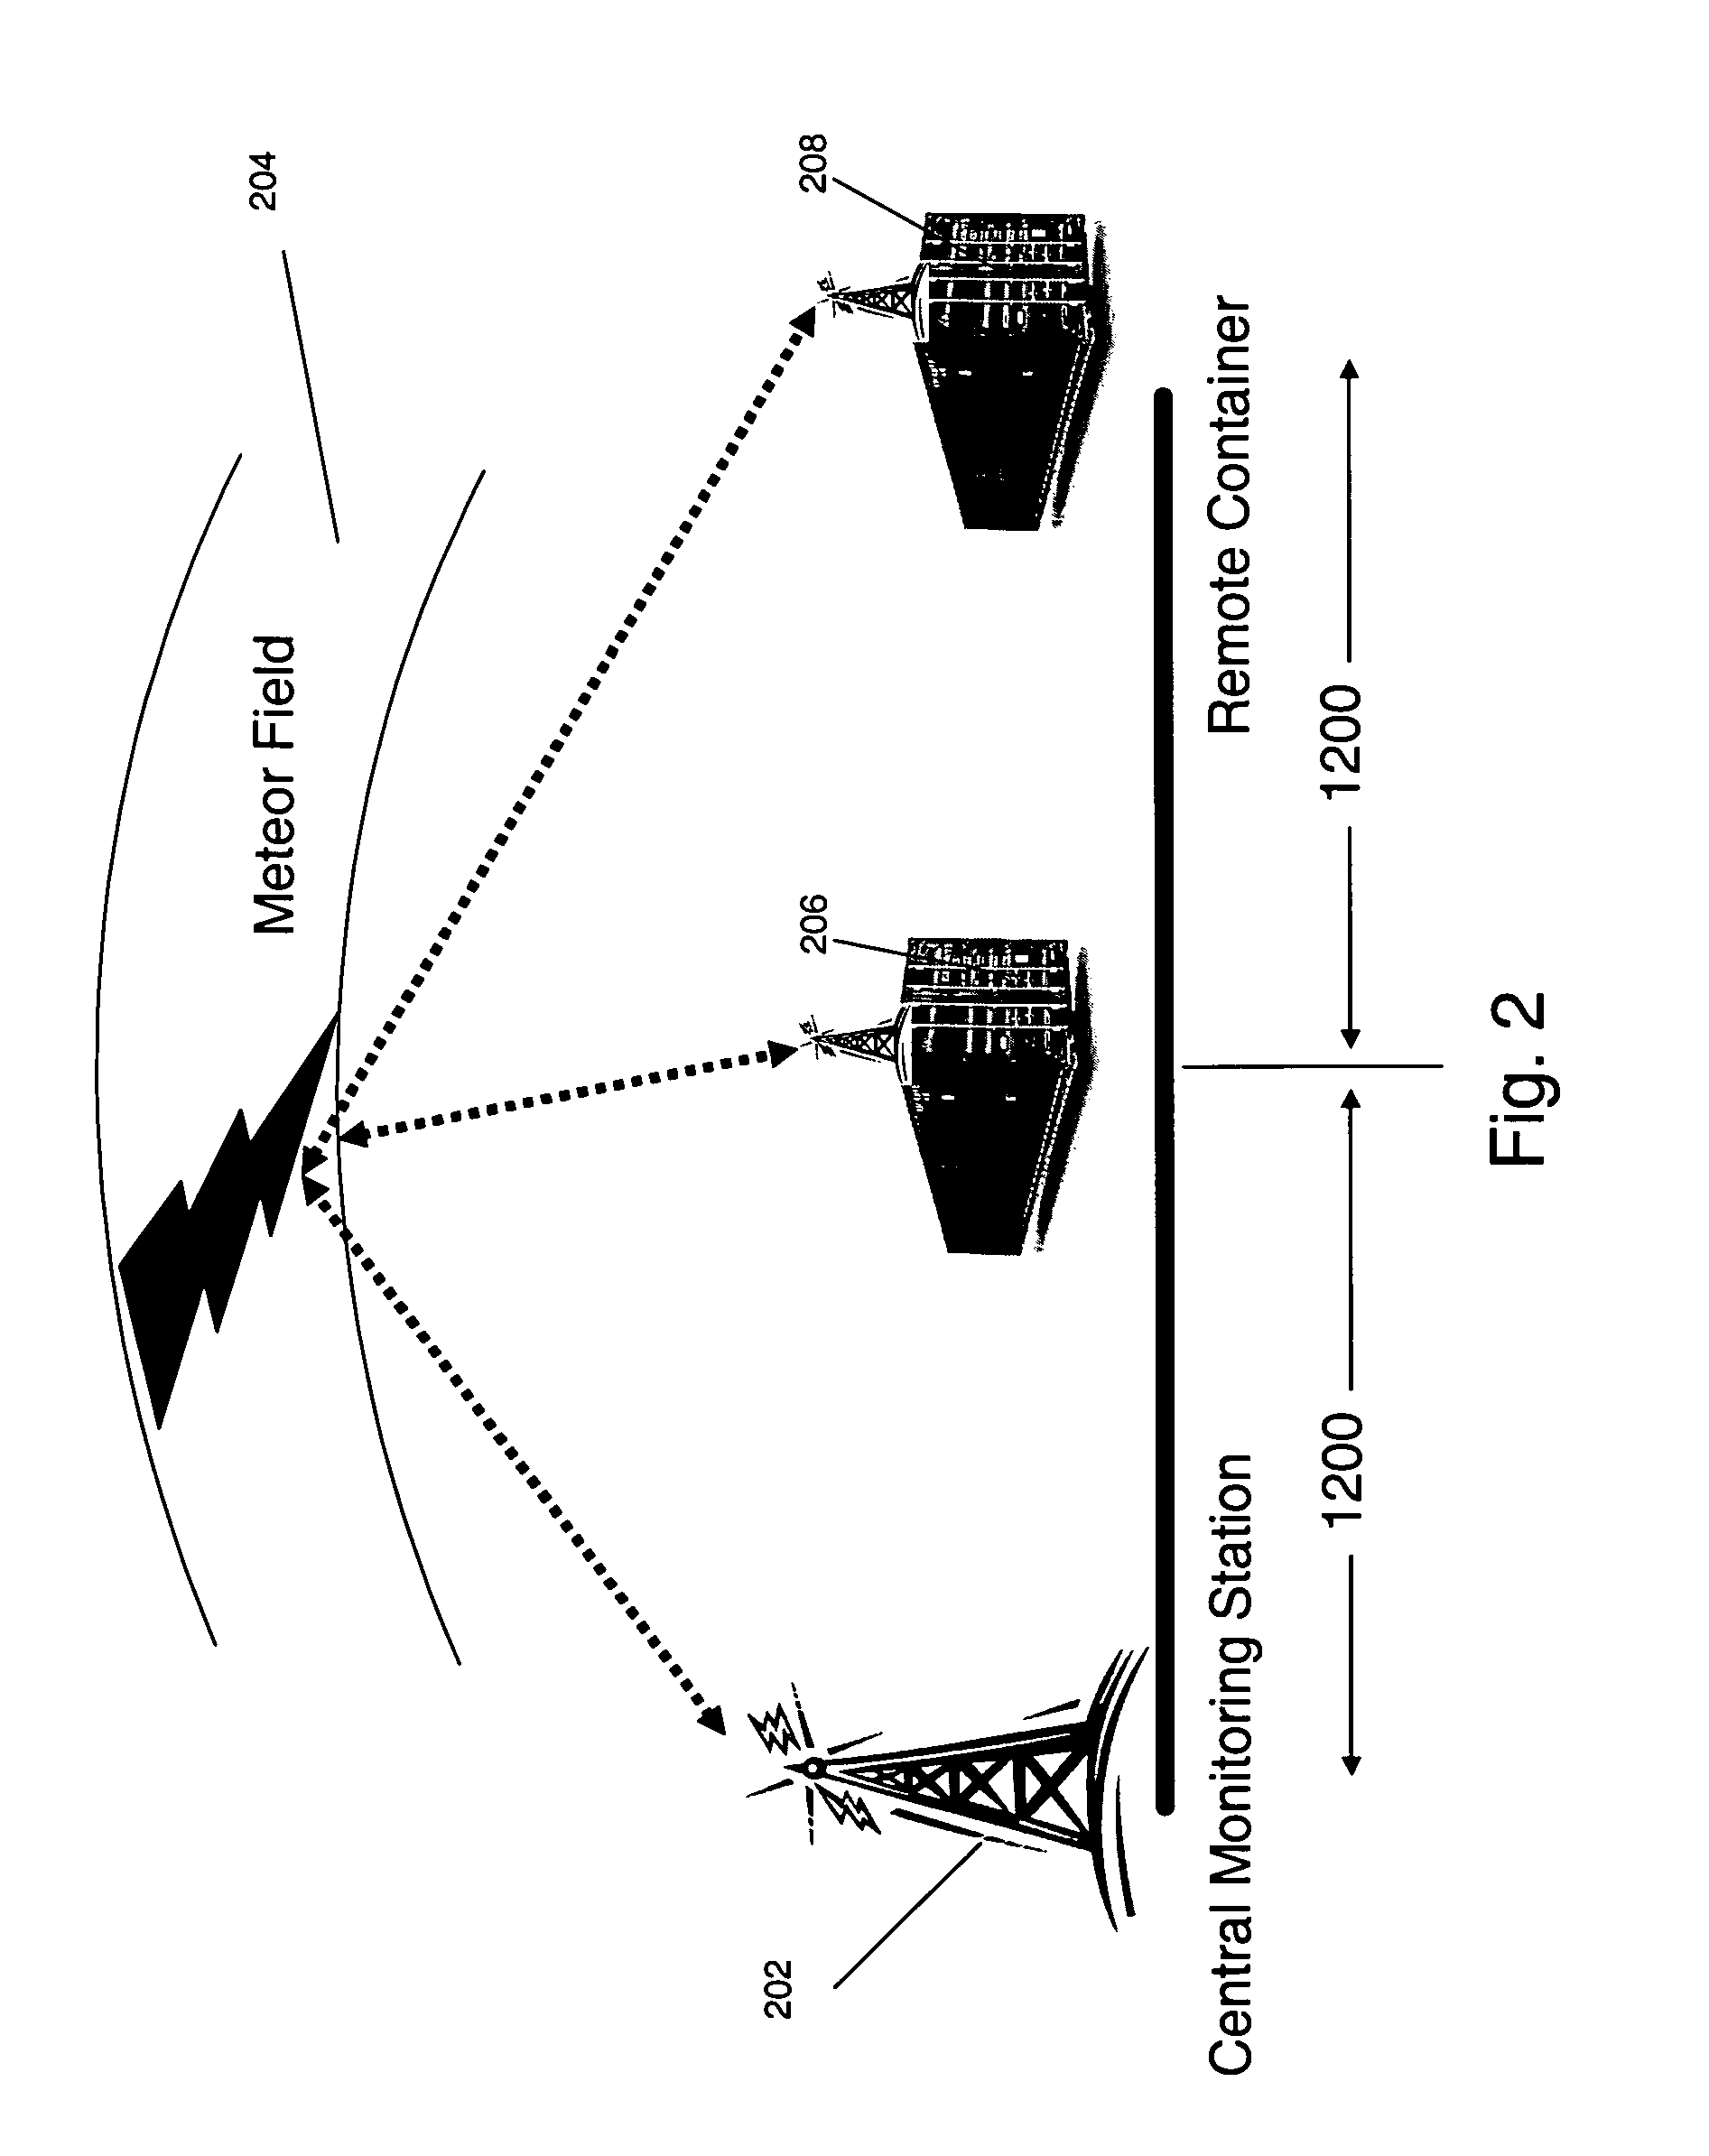 System and method for using meteor burst communications in a container tracking system